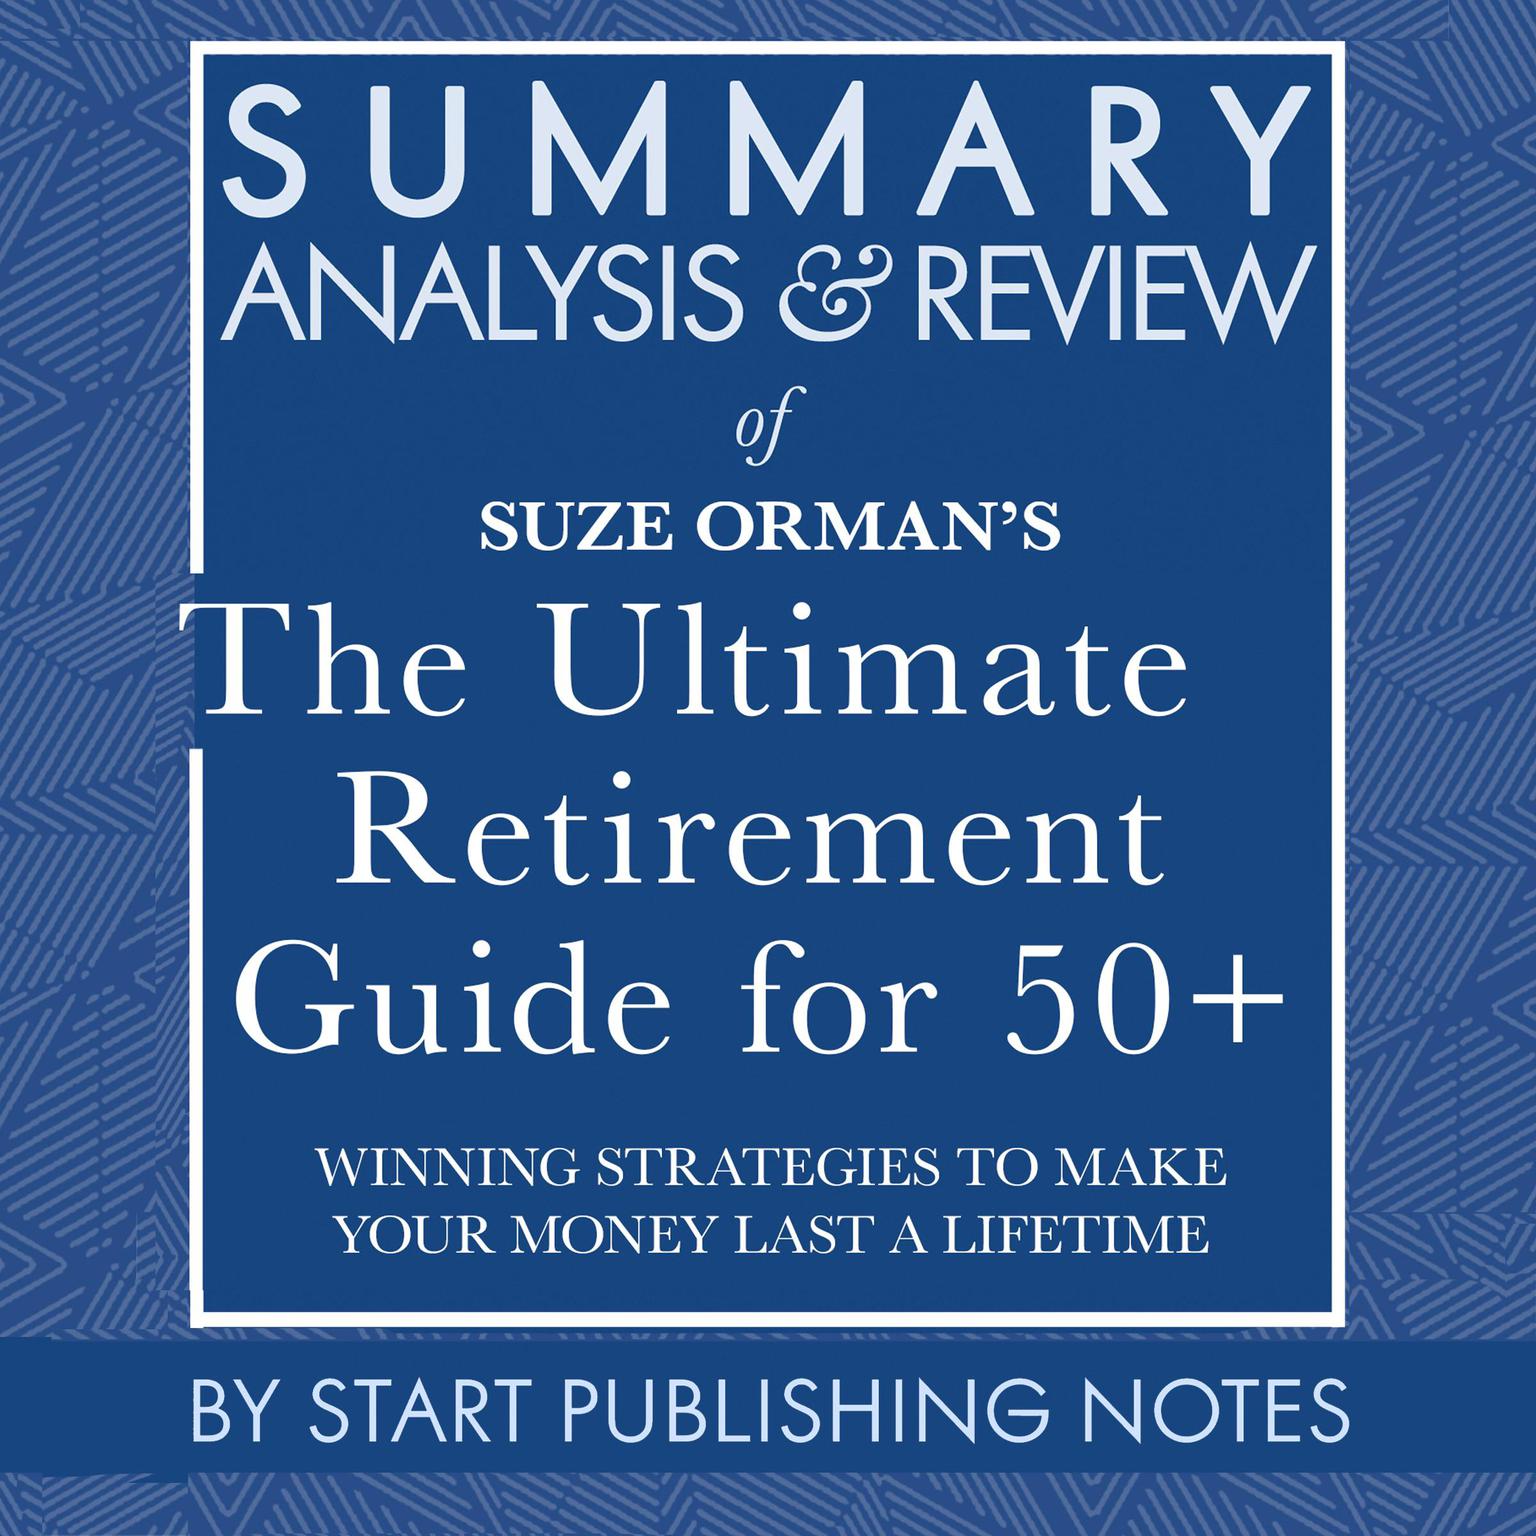 Summary, Analysis, and Review of Suze Ormans The Ultimate Retirement Guide for 50+: Winning Strategies to Make Your Money Last a Lifetime Audiobook, by Start Publishing Notes